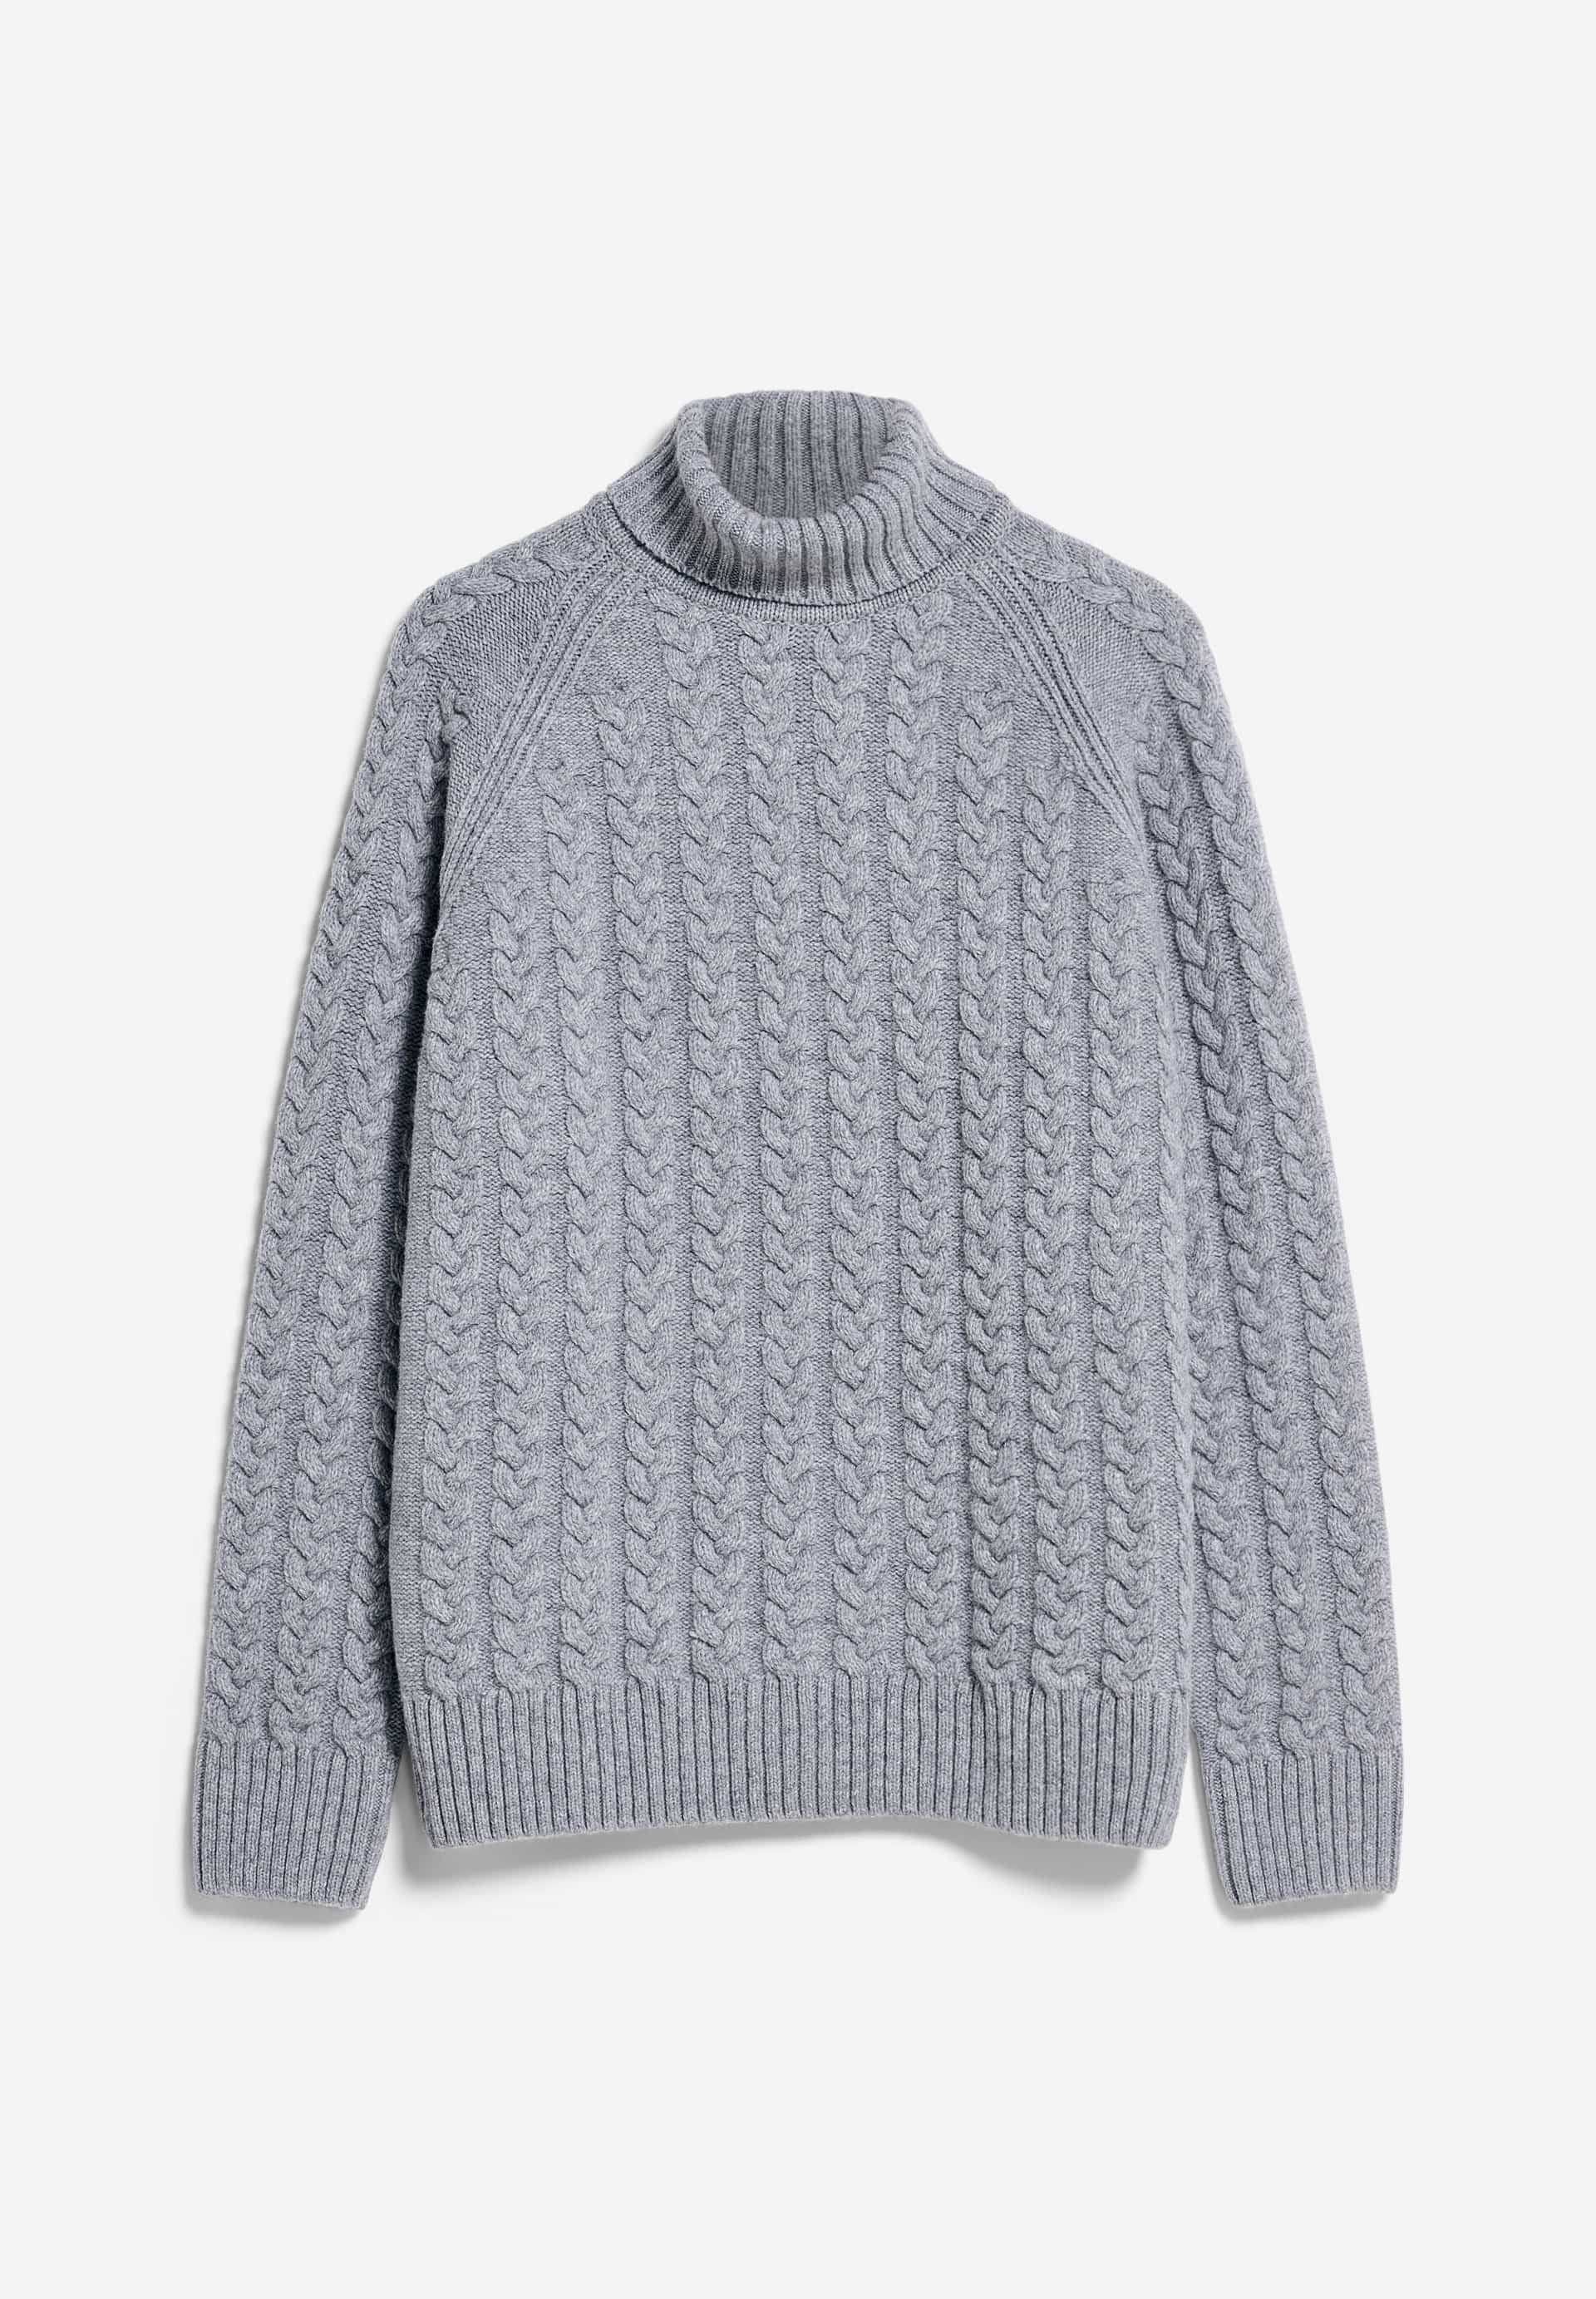 DAAWIDE Sweater Relaxed Fit made of Organic Wool Mix